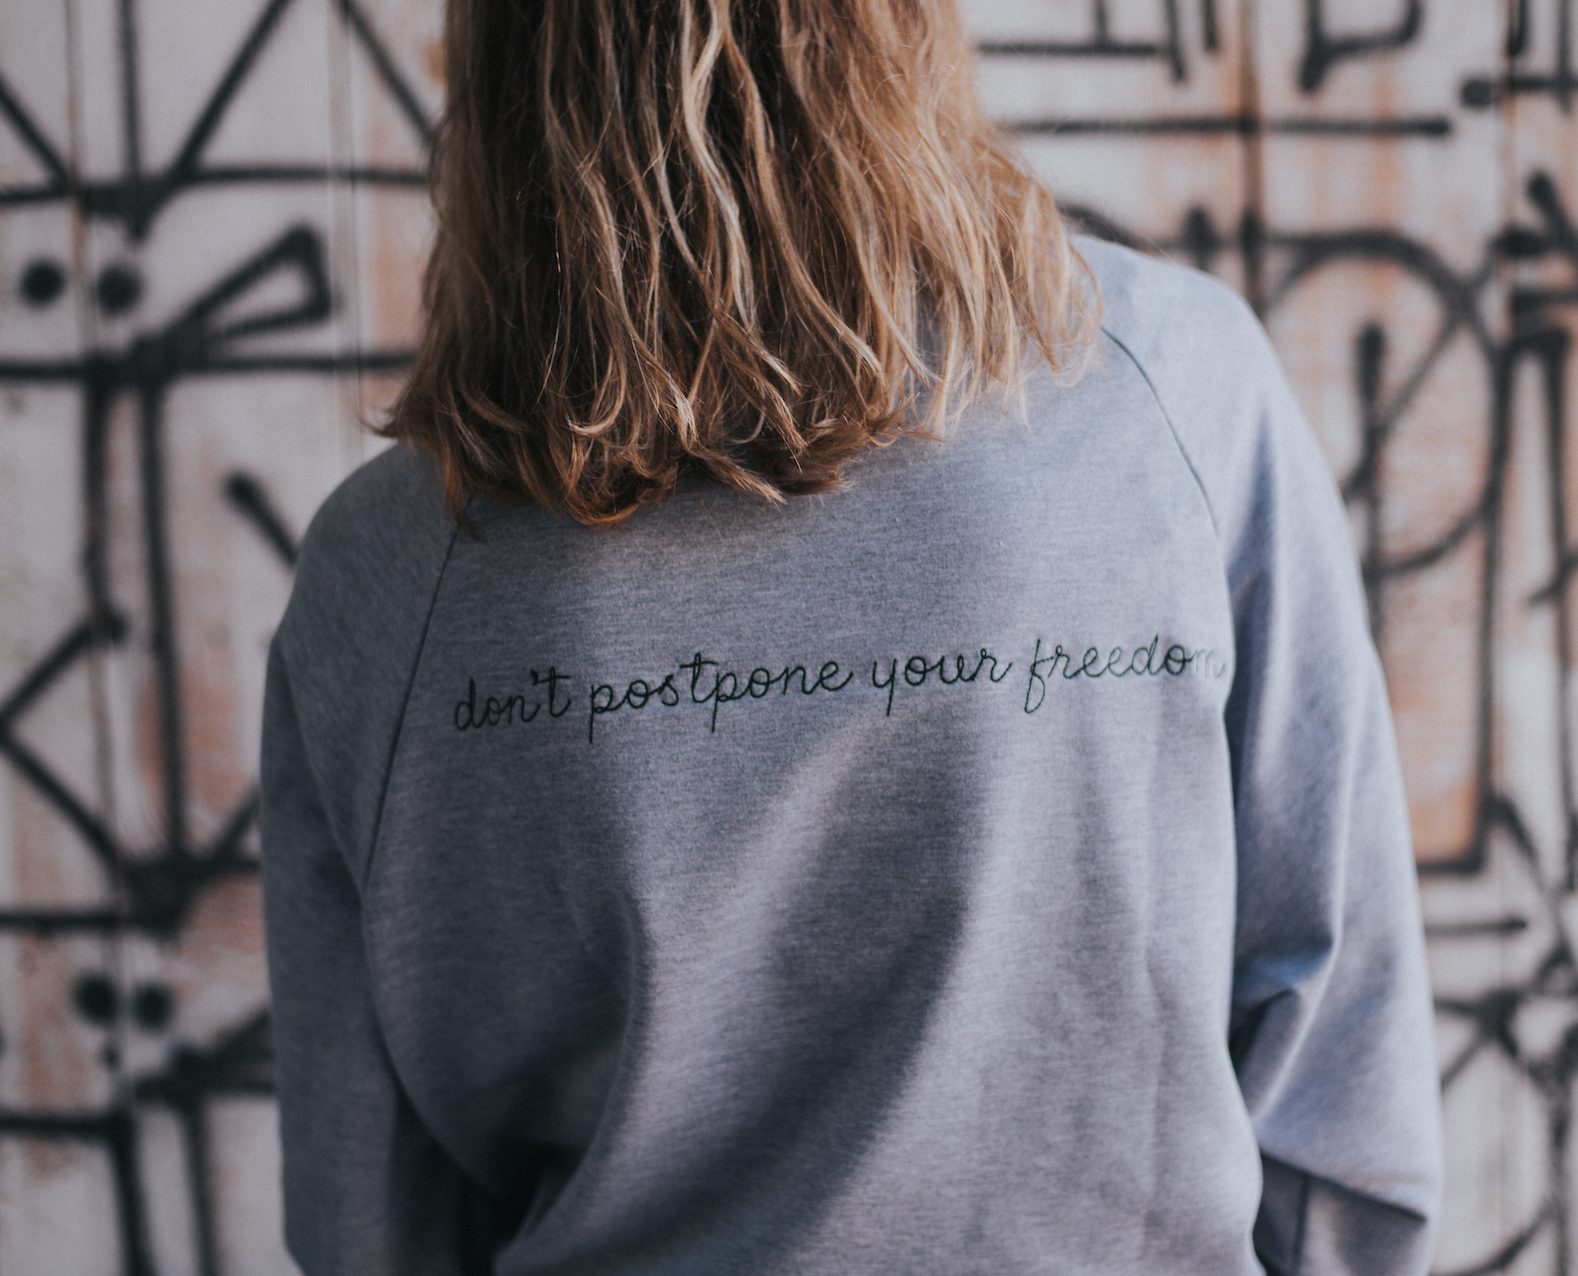 Don't Sweat Your Freedom, French Terry Sweatshirt GREY - Also, Freedom